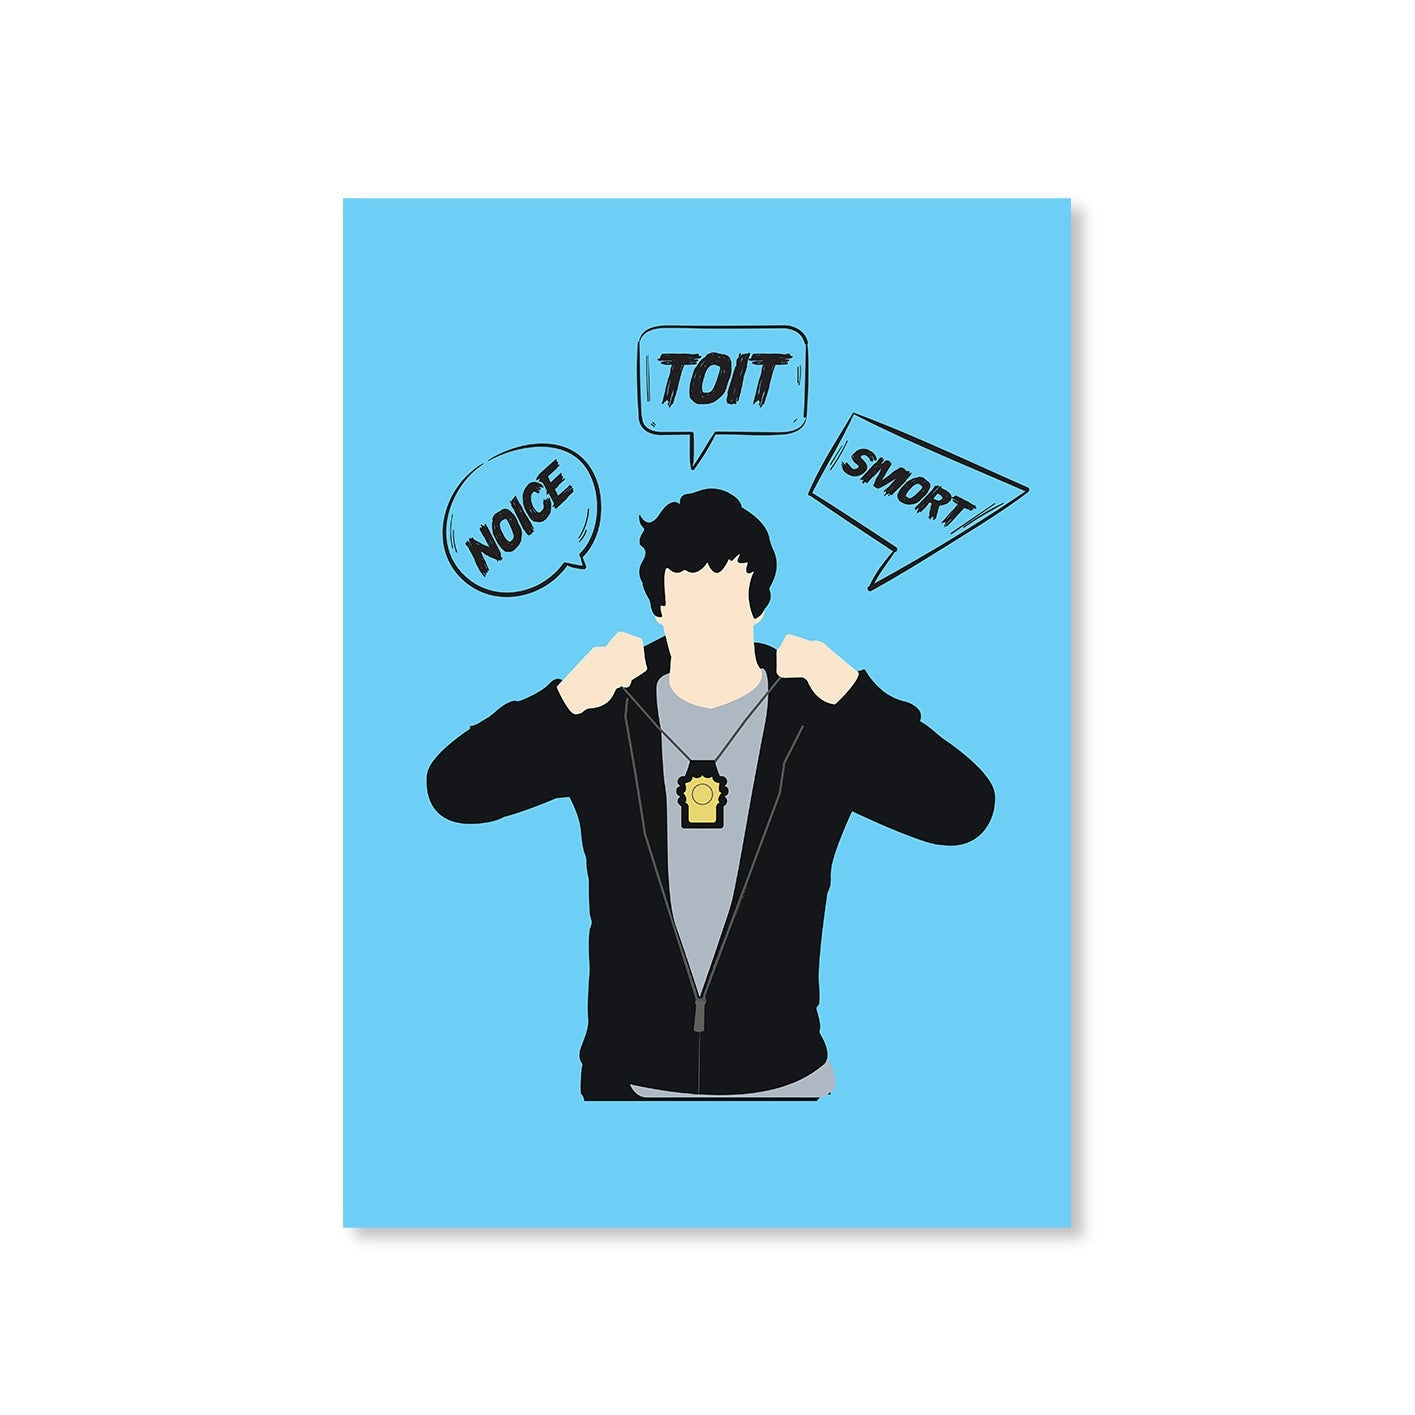 brooklyn nine-nine noice toit smort poster wall art buy online india the banyan tee tbt a4 detective jake peralta terry charles boyle gina linetti andy samberg merchandise clothing acceessories